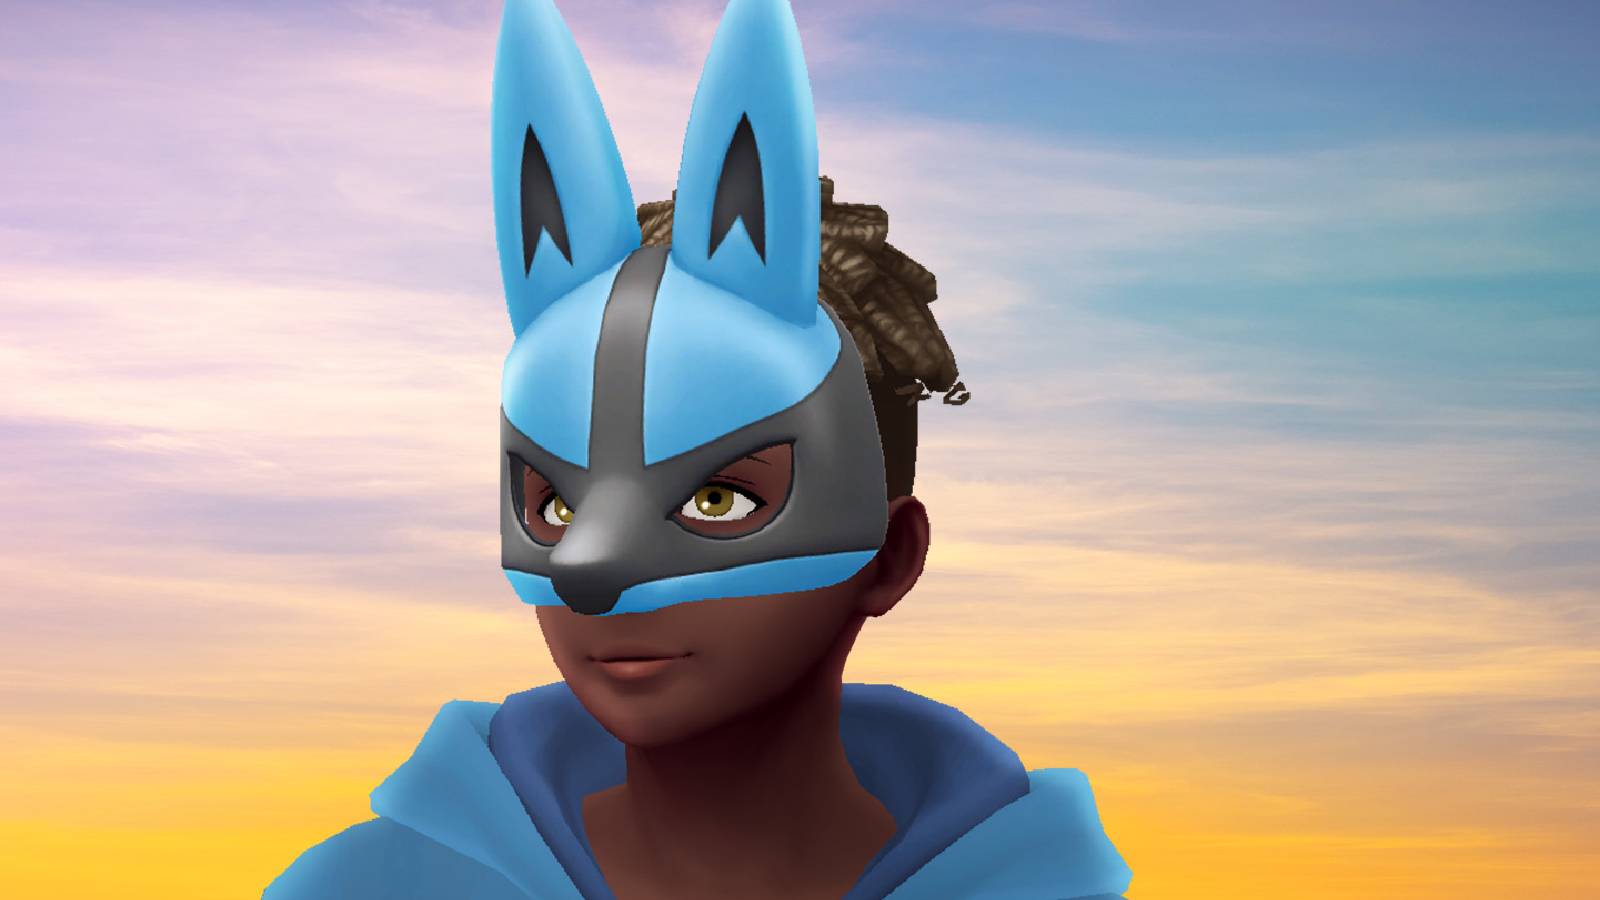 Key art from Pokemon Go shows a character wearing a Lucario mask